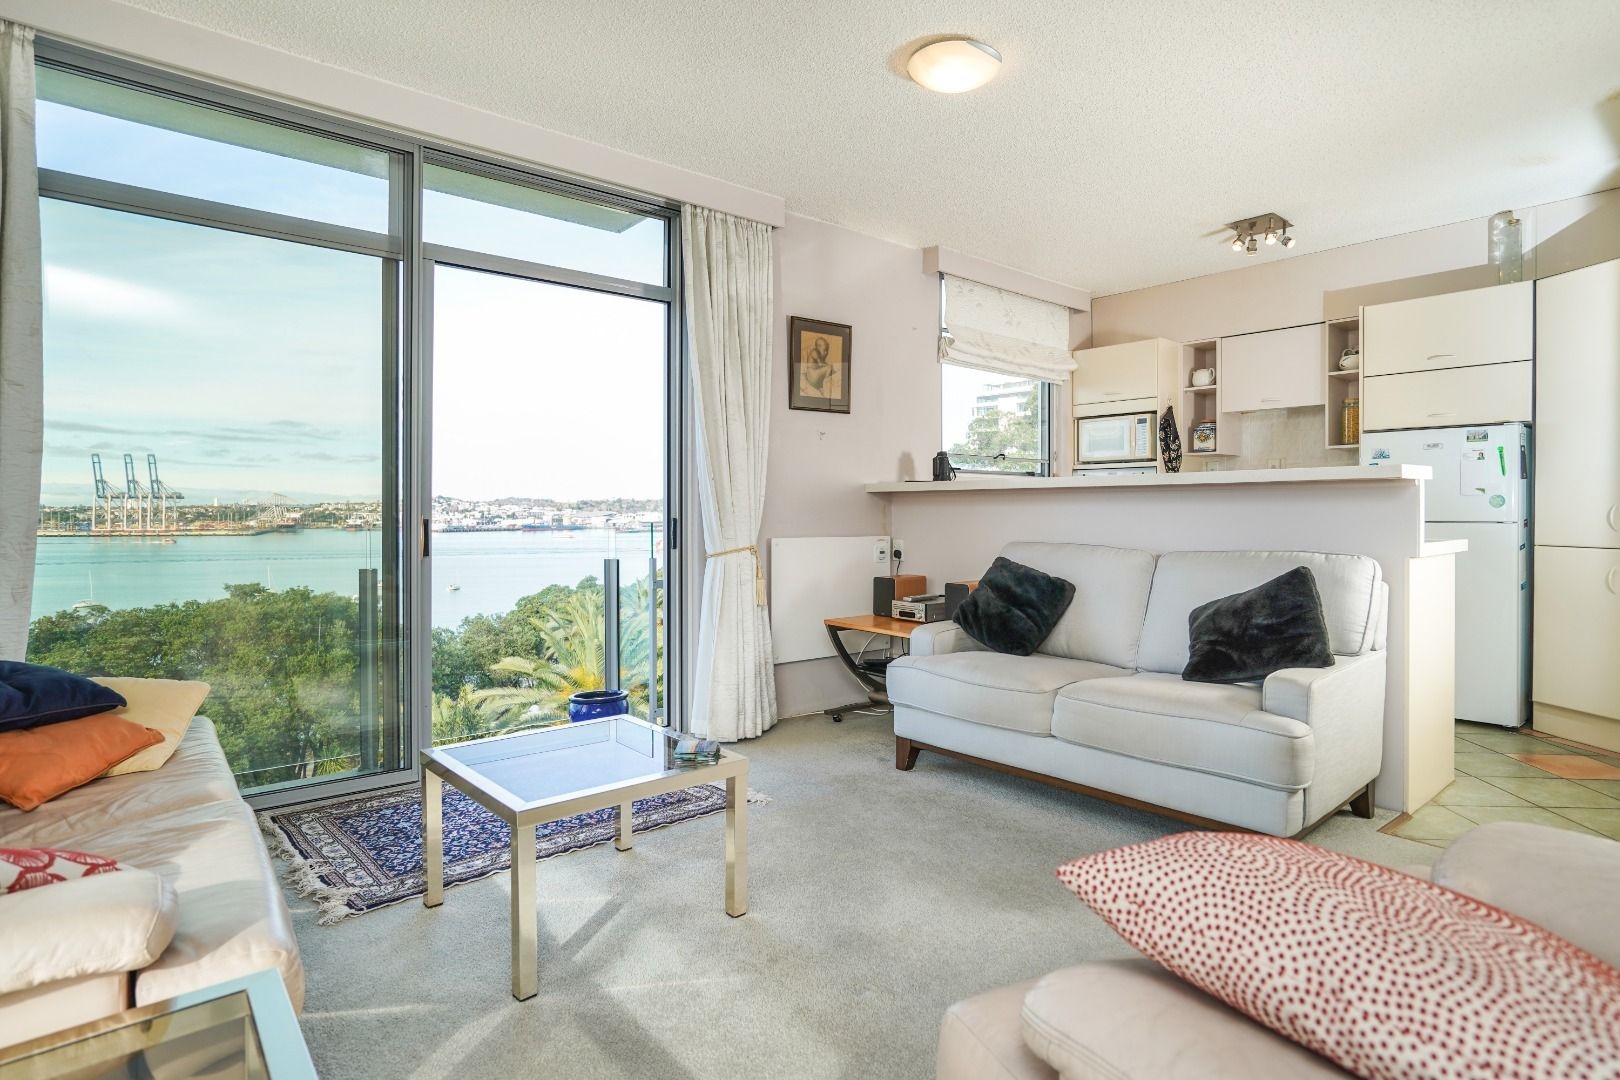 180 degree views in this unique Stanley Bay apartment image 2